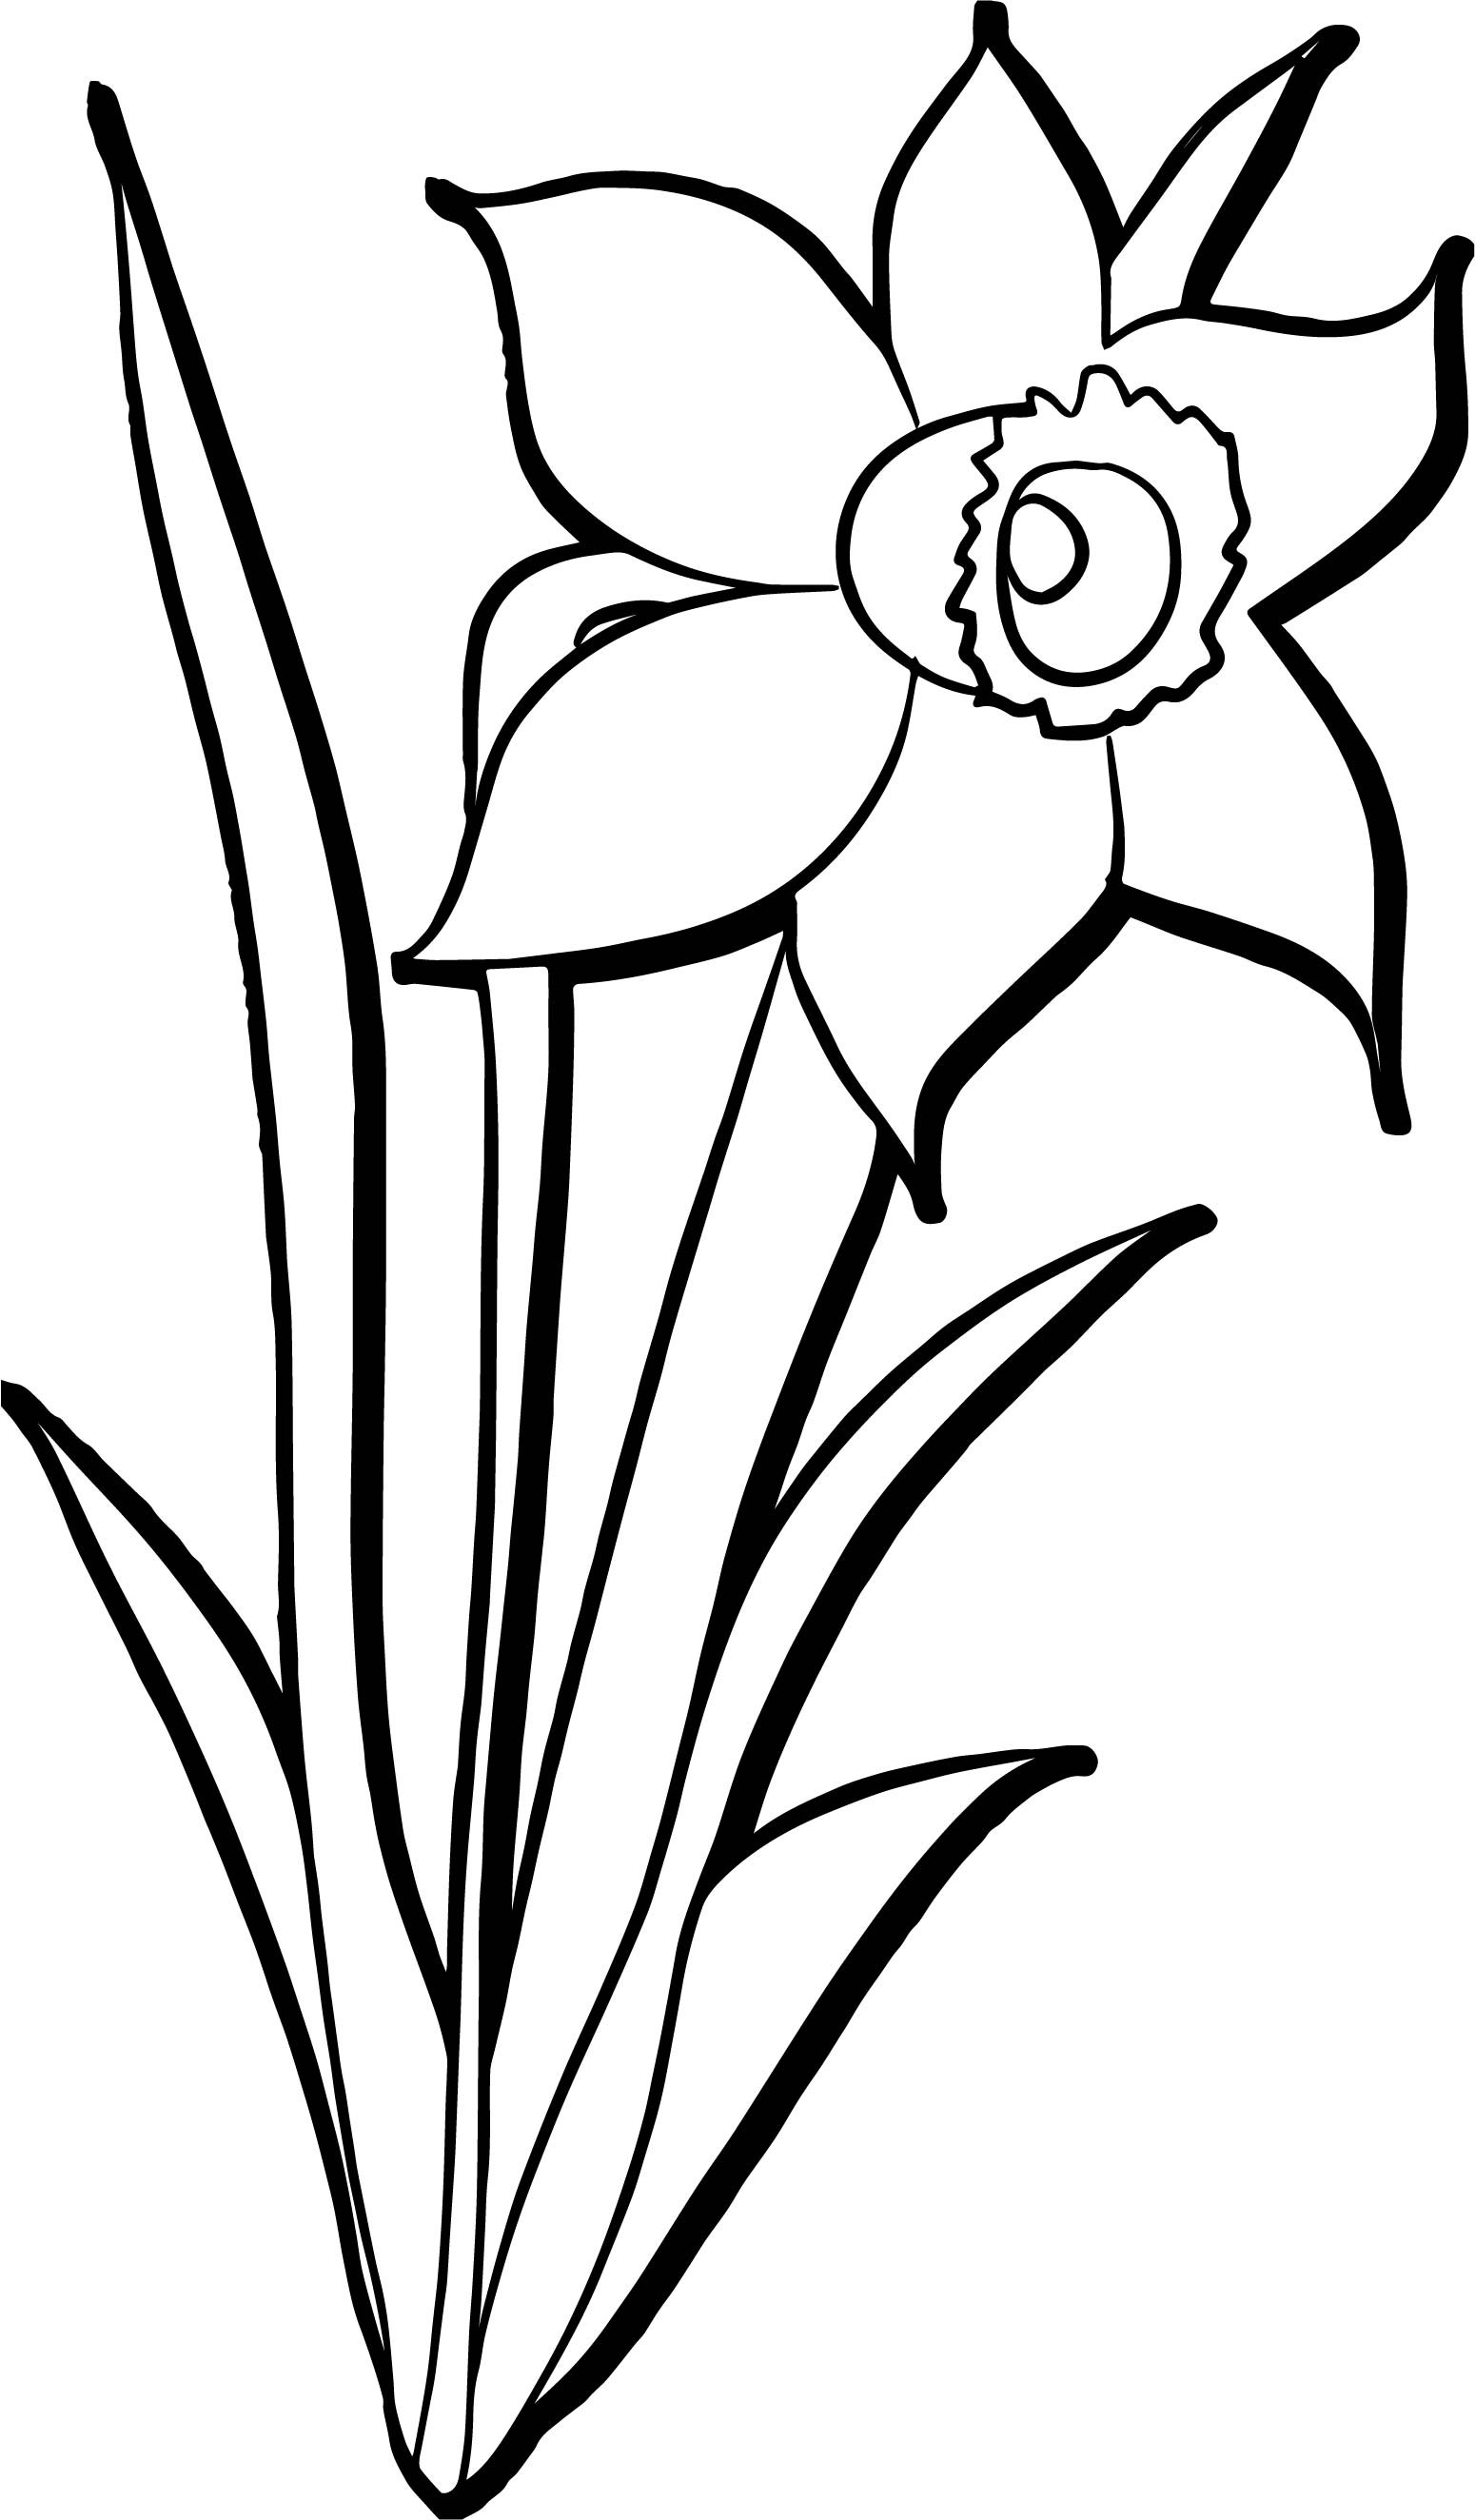 May Flowers Coloring Pages
 April Showers Bring May Flowers Coloring Page